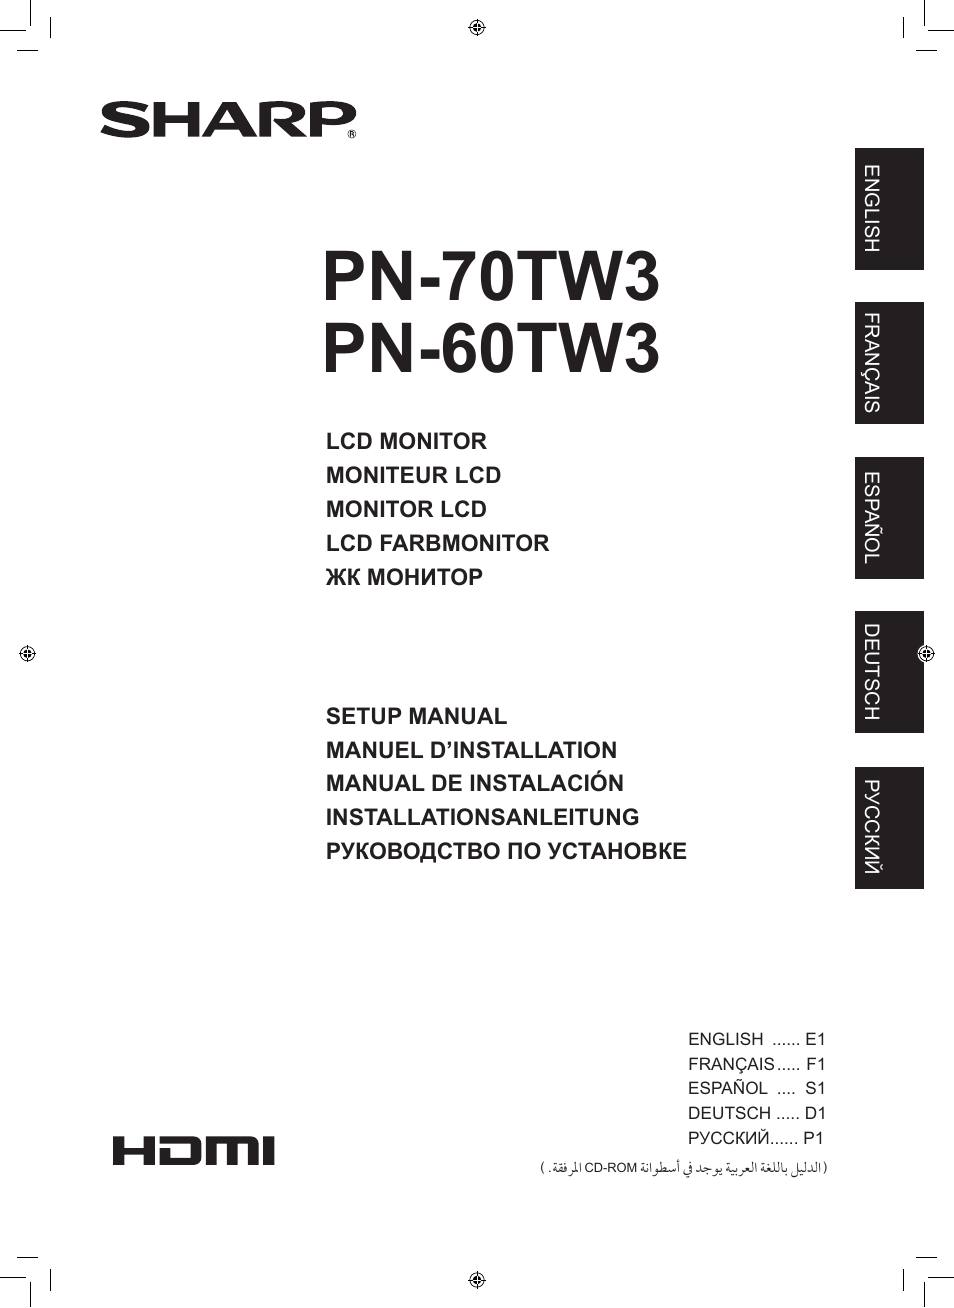 Sharp PN-60TW3 User Manual | 56 pages